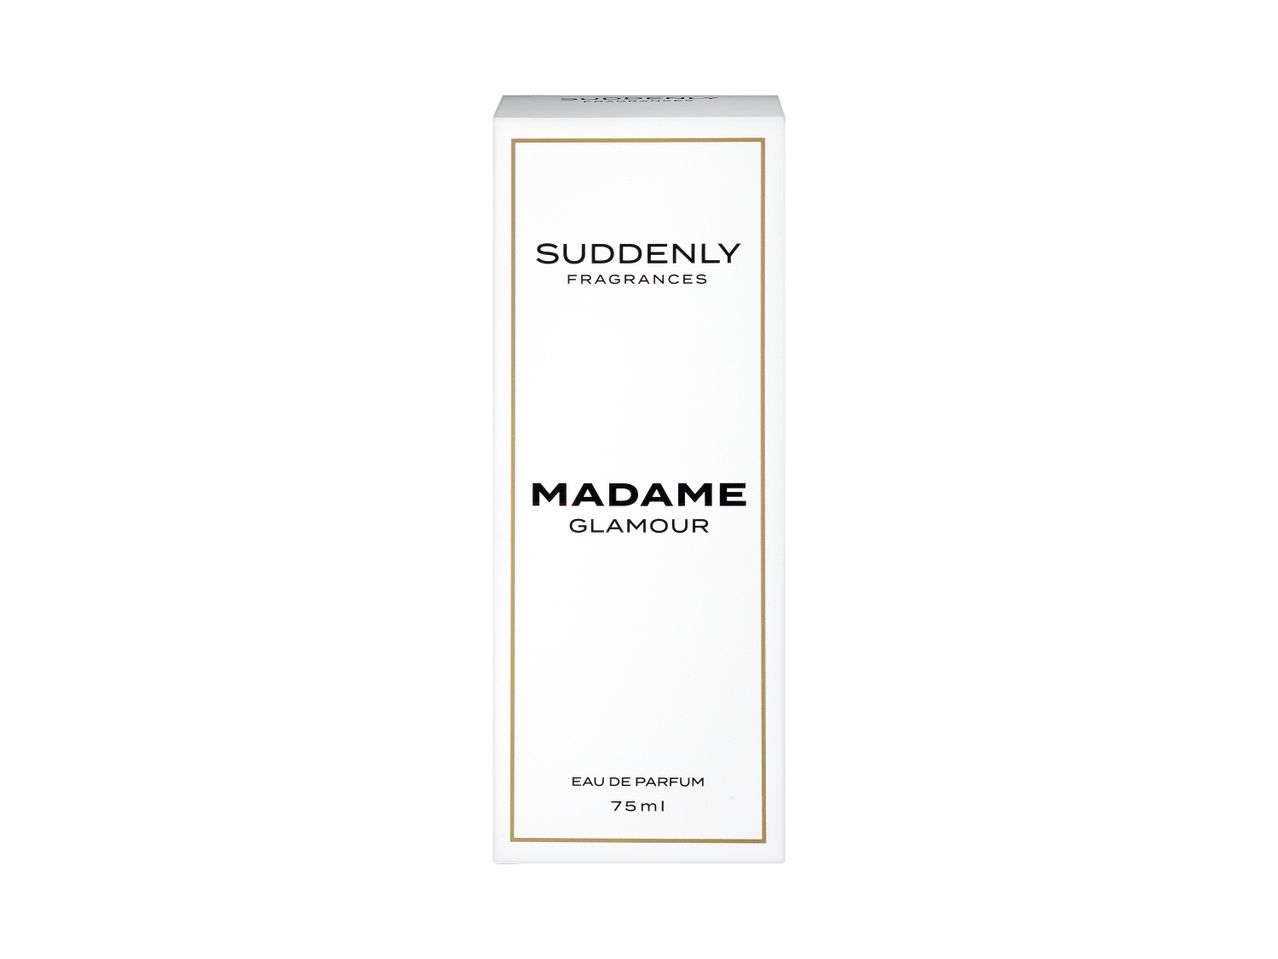 Go to full screen view: Suddenly Fragrances Madame Glamour - Image 1